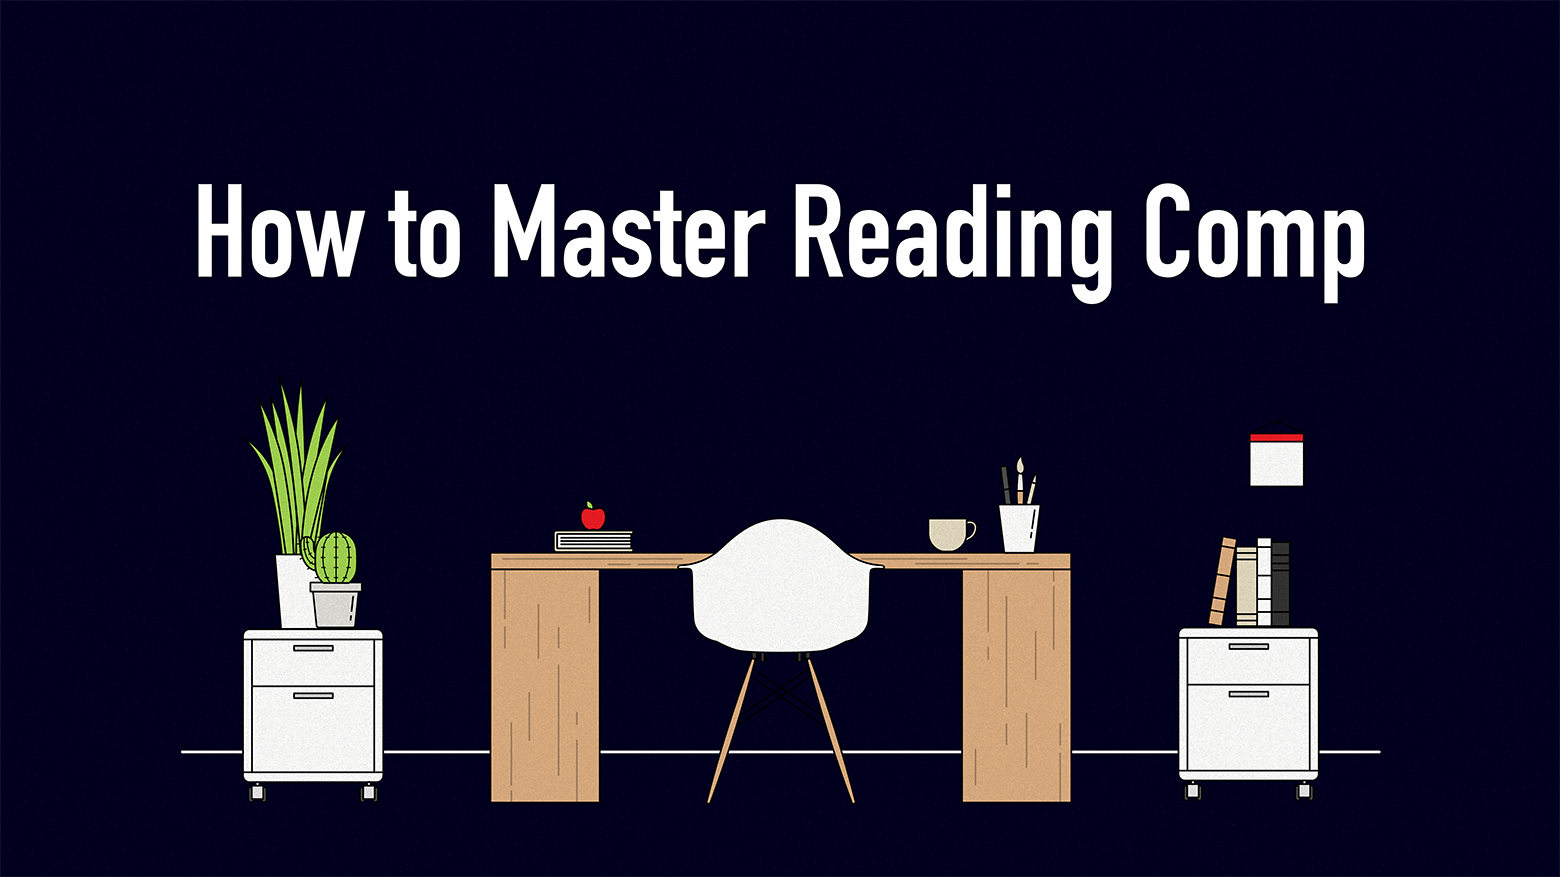 Essential Reading Comprehension Tips and Information